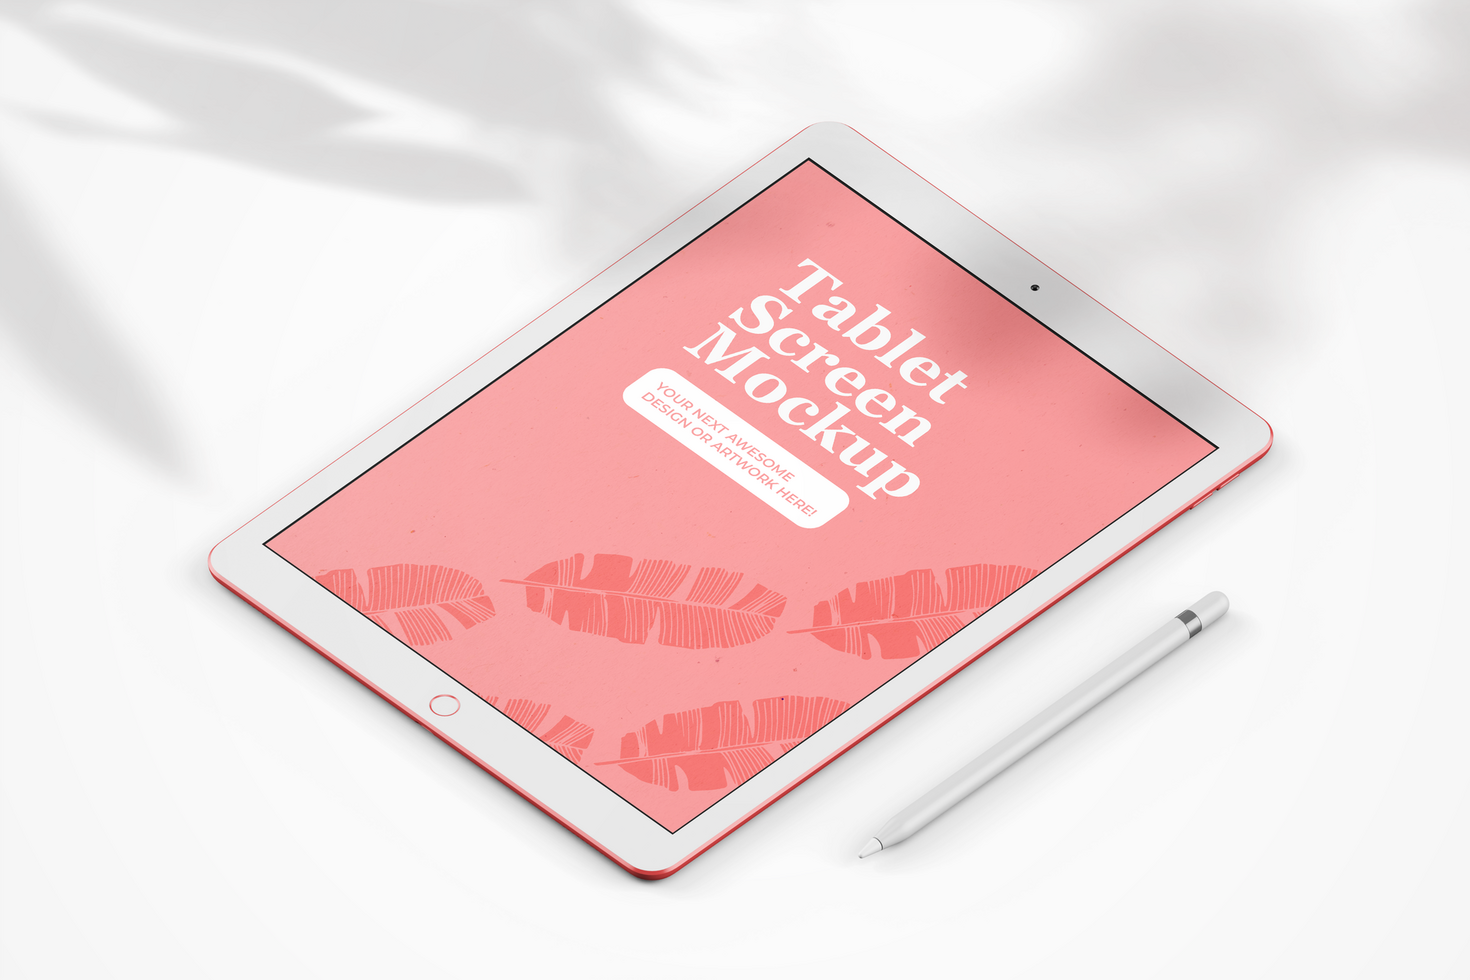 modern 12.9 inch screen display tablet mobile device with pencil realistic mockup template psd